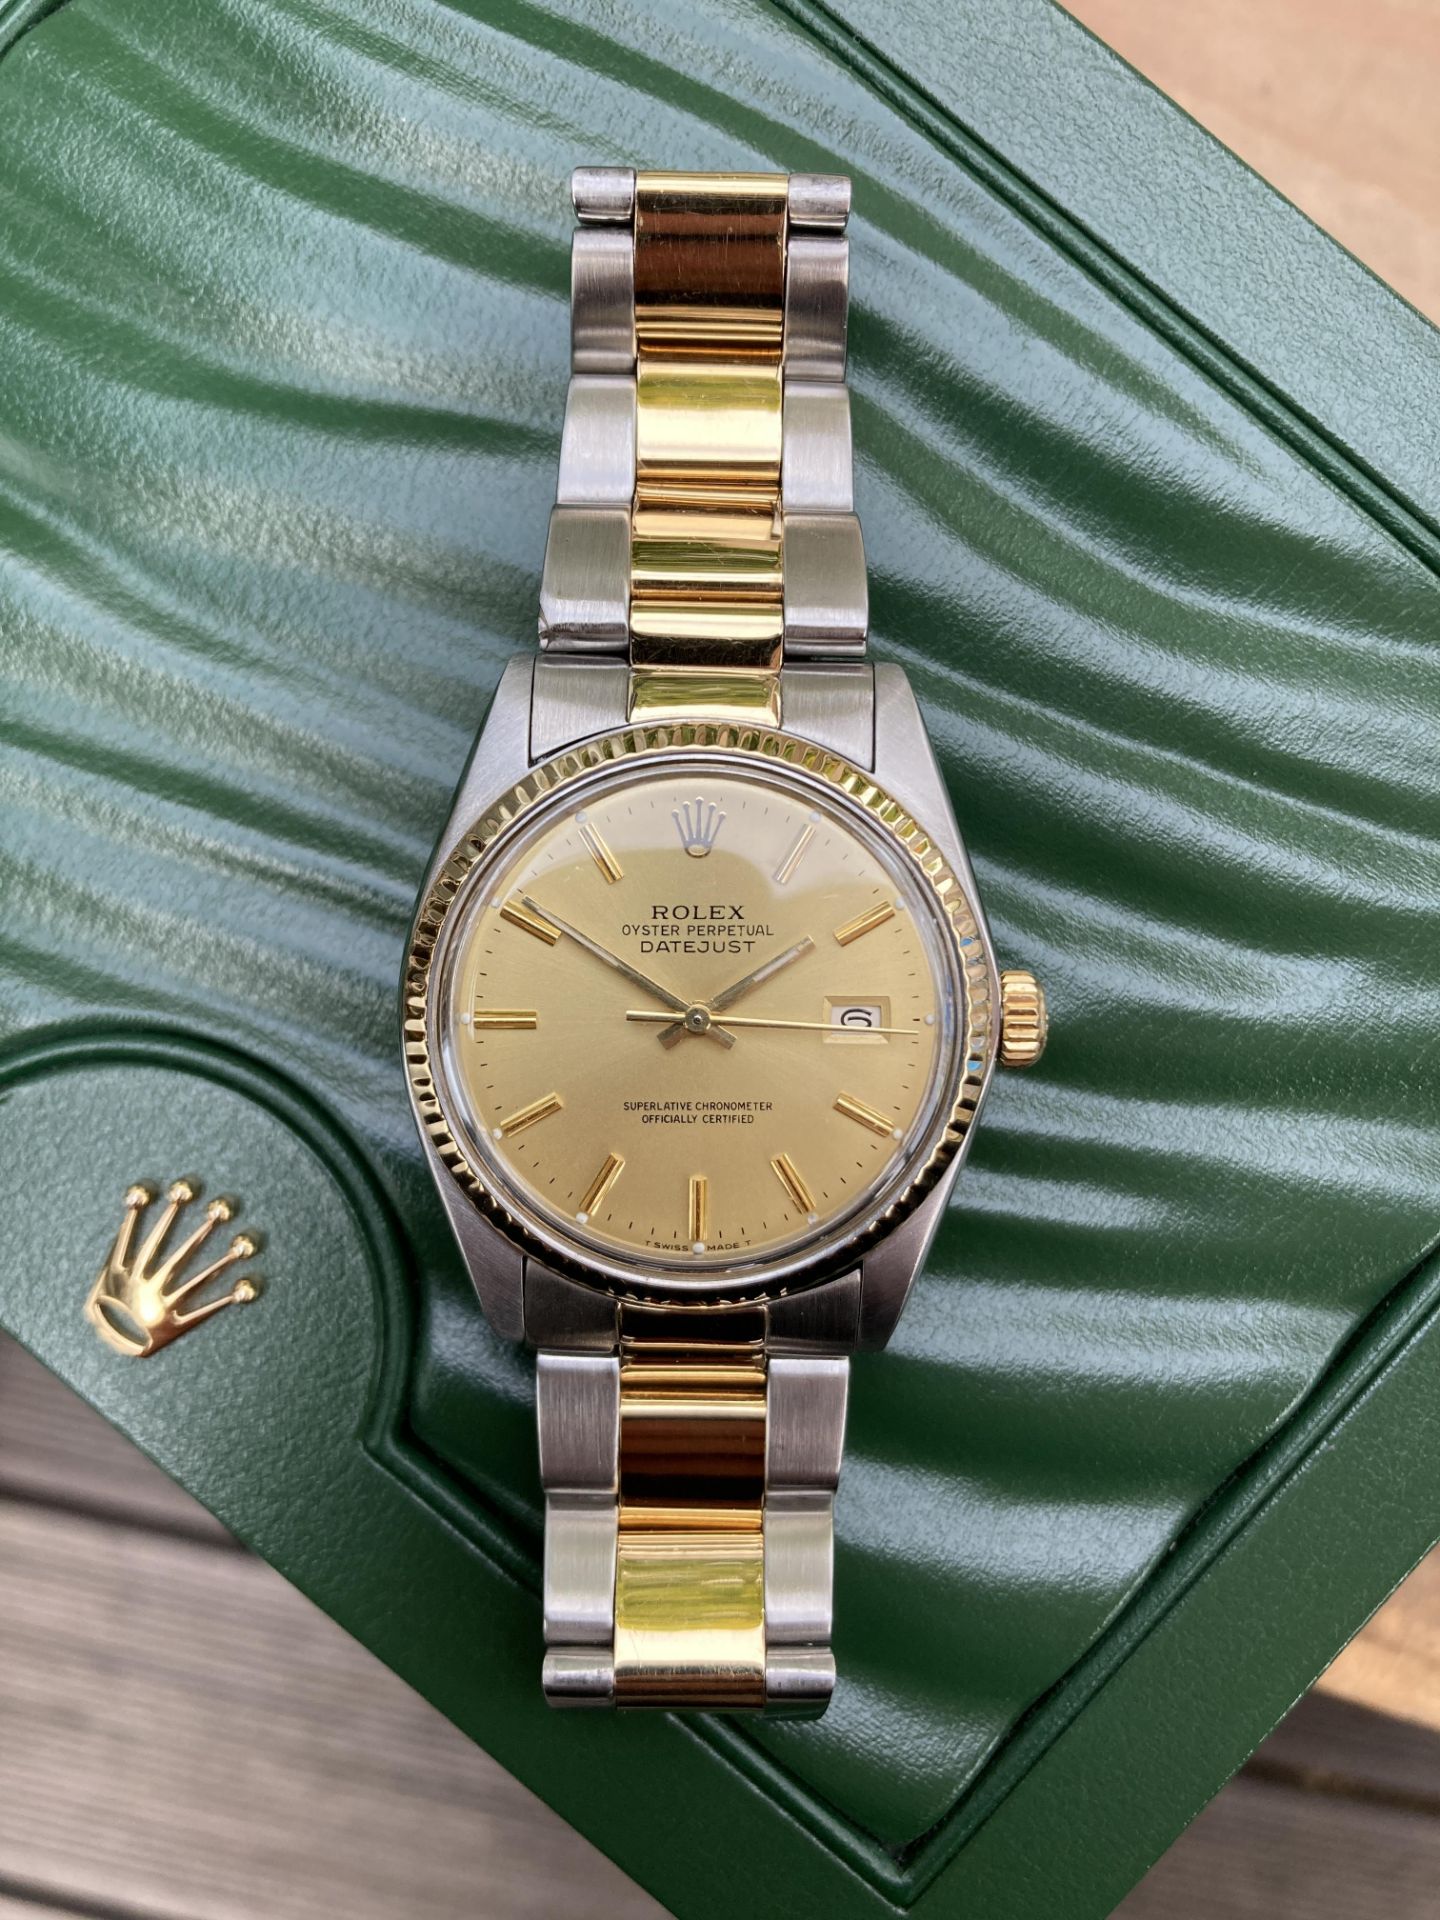 ROLEX DATEJUST 36MM, BIMETAL STAINLESS STEEL & 18CT YELLOW GOLD, CHAMPAGNE DIAL - BOX NOT INCLUDED - Image 8 of 11